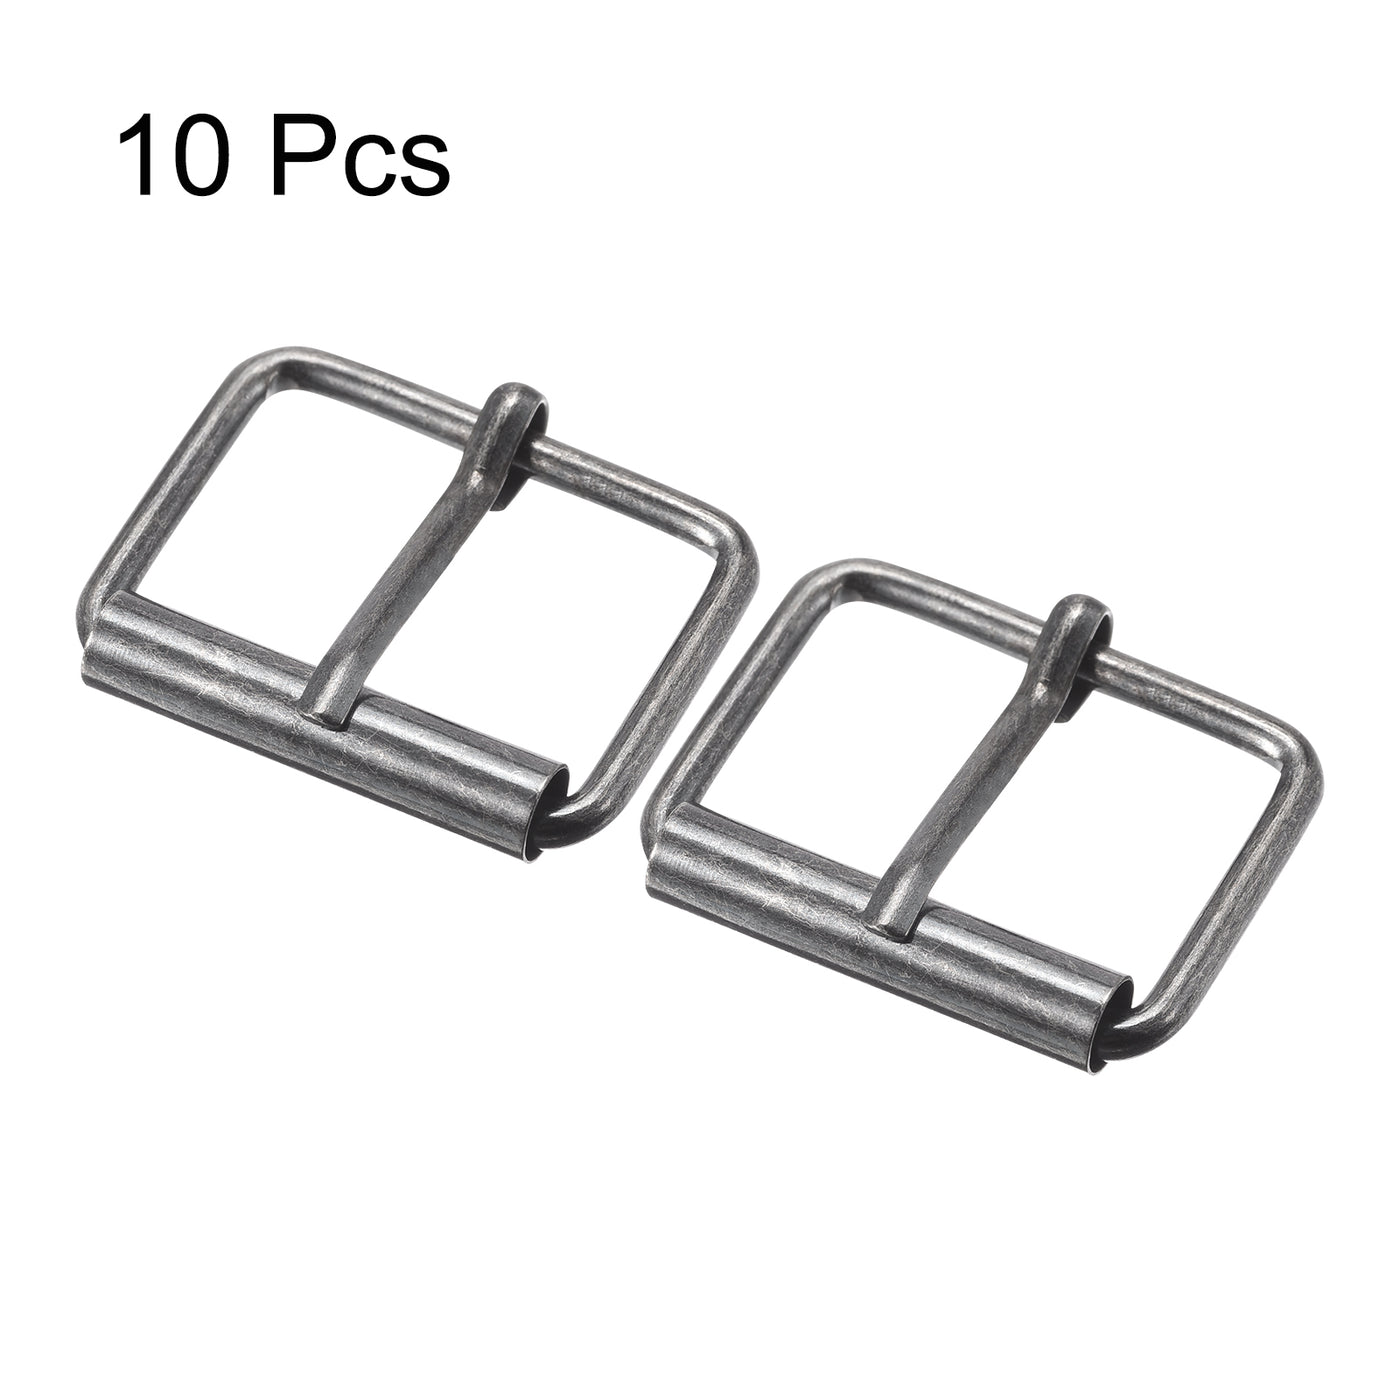 uxcell Uxcell 35mm(1.38") Metal Roller Buckles for Belts Bags Straps DIY Dark Gray 10pcs